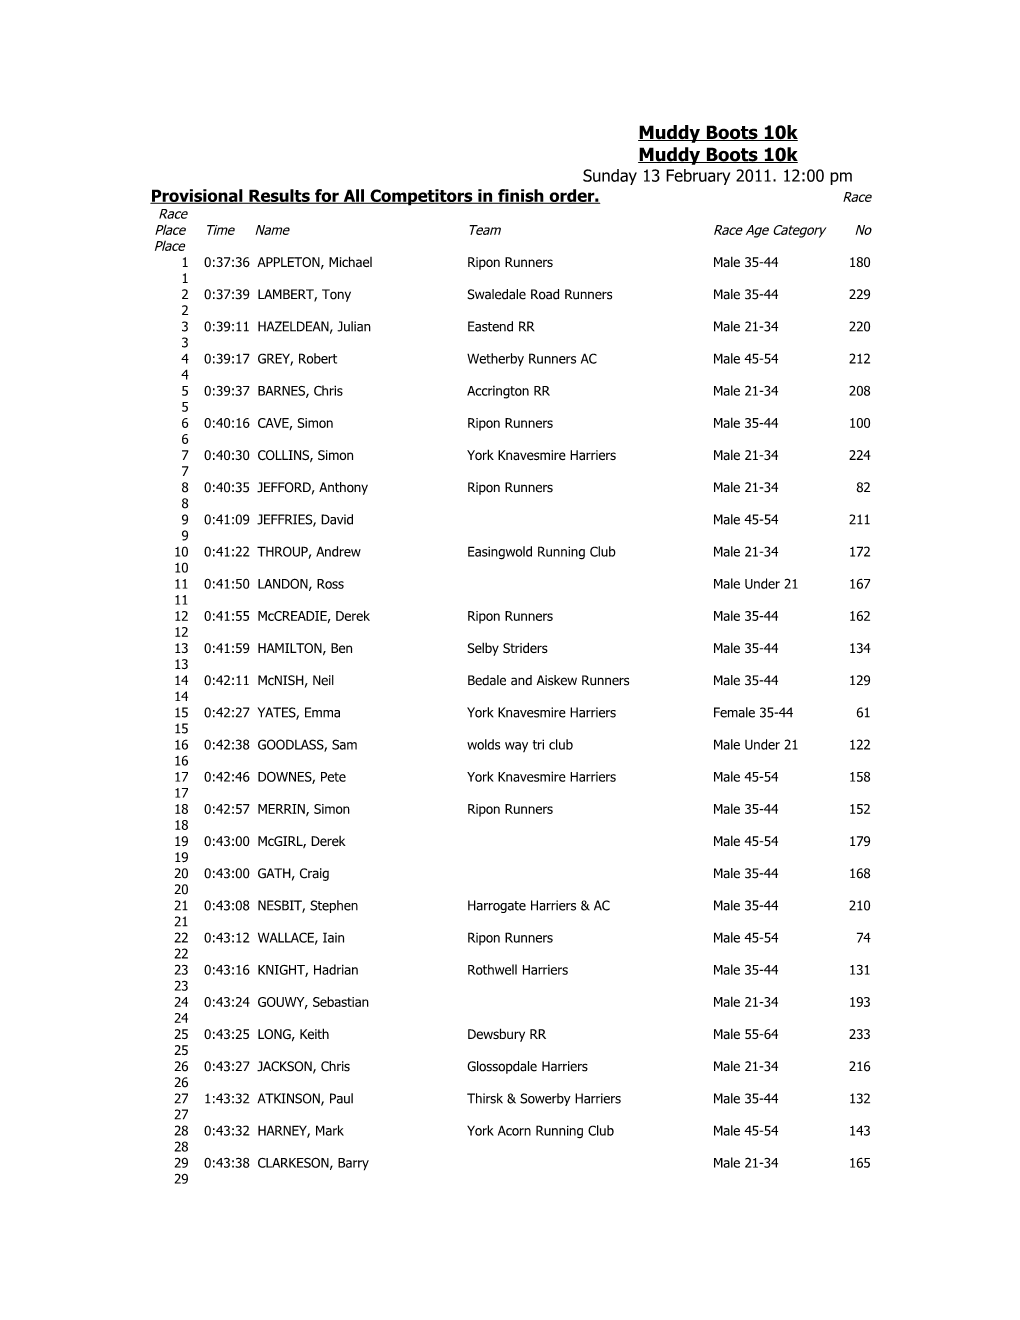 Provisional Results for All Competitors in Finish Order. Race Race